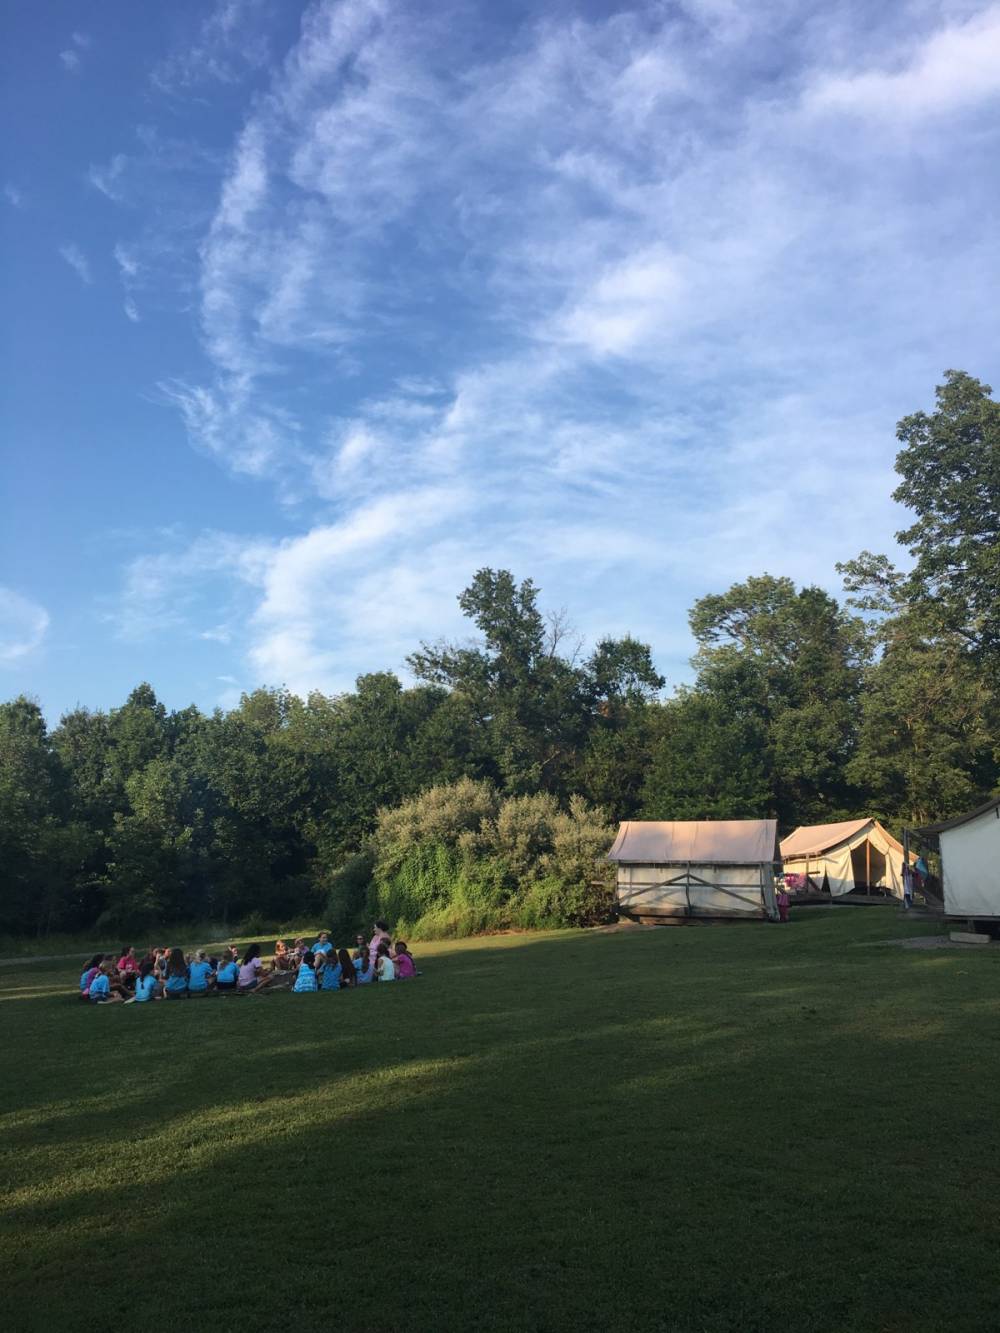 TOP NEW JERSEY SUMMER CAMP: Camp Agnes DeWitt is a Top Summer Camp located in Hillsborough New Jersey offering many fun and enriching camp programs. Camp Agnes DeWitt also offers CIT/LIT and/or Teen Leadership Opportunities, too.